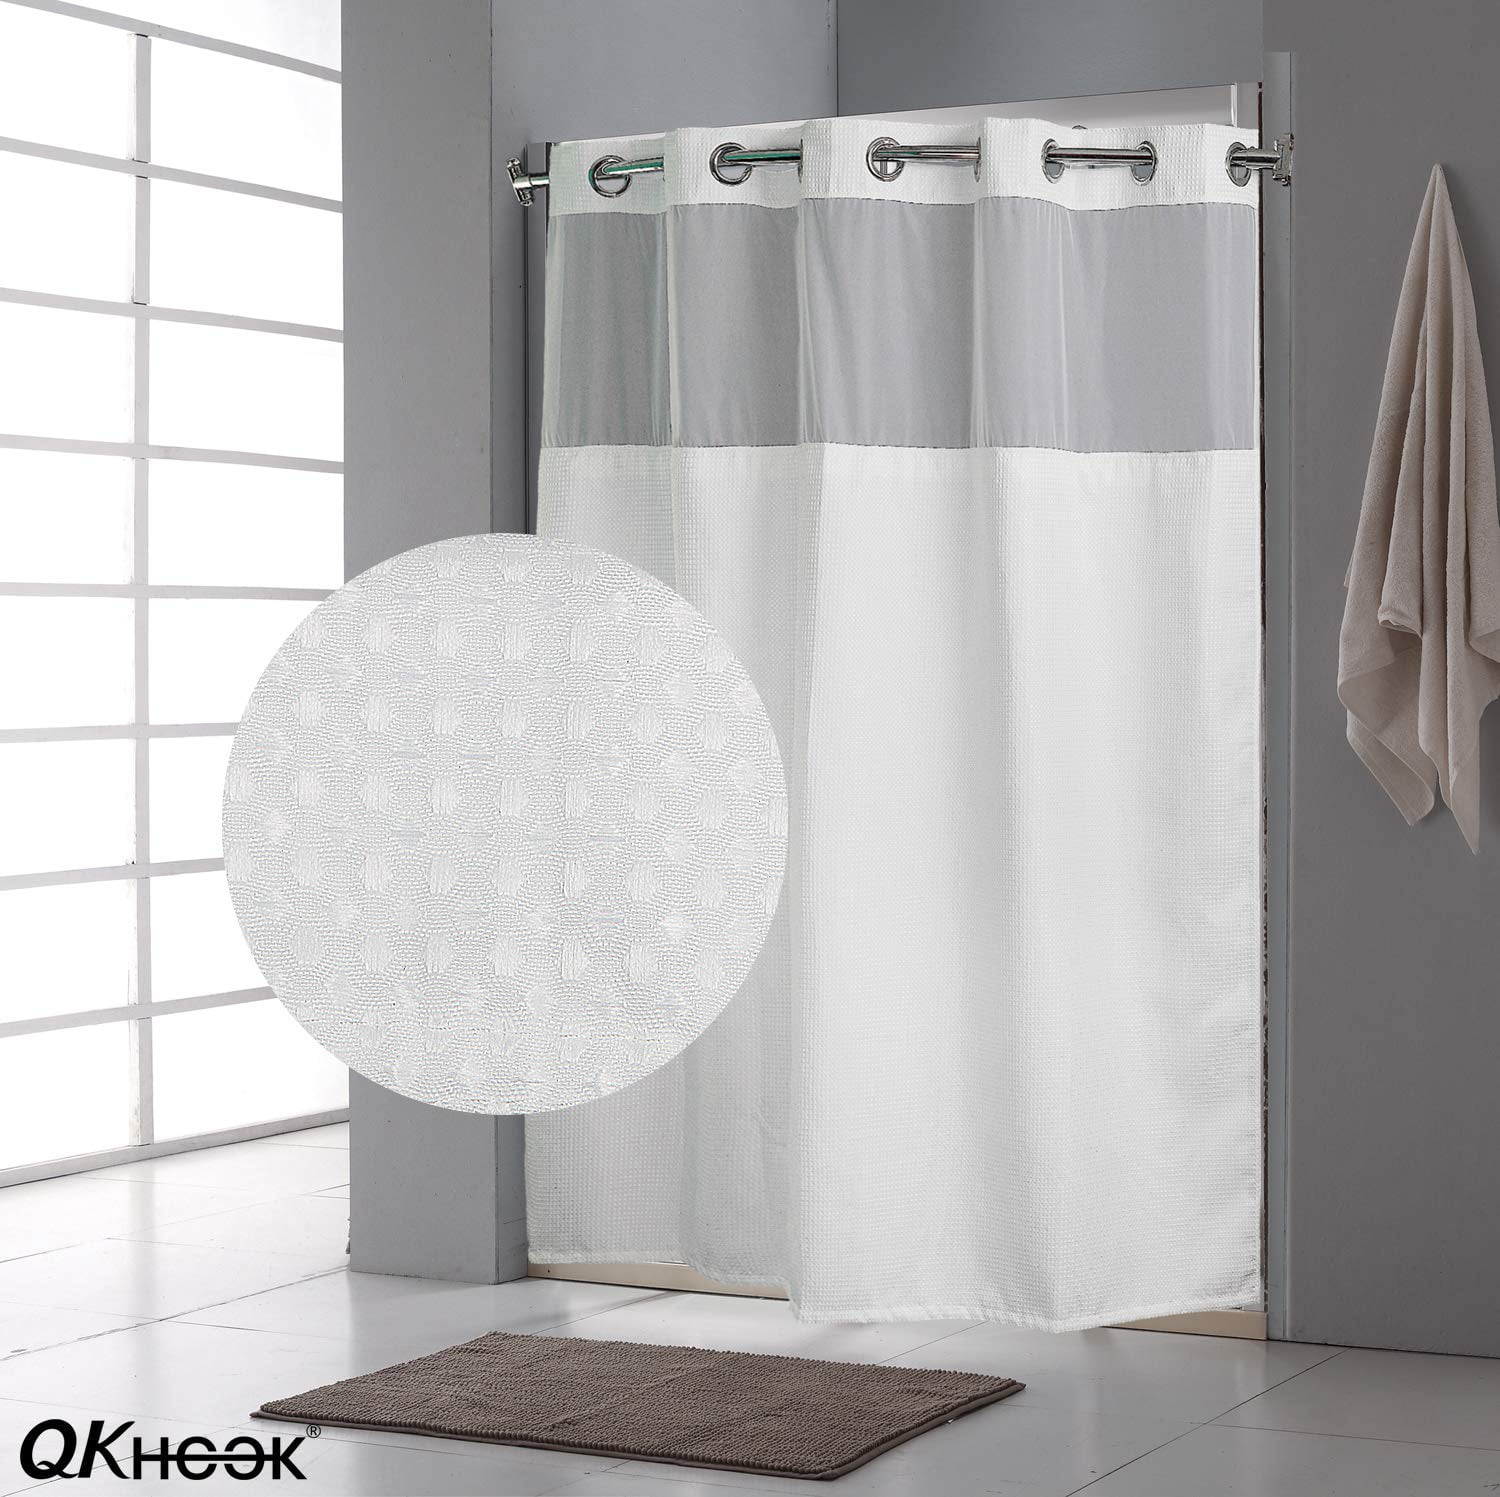 Qkhook Hookless Shower Curtain With, Hookless Shower Curtain Liner Clear Plastic